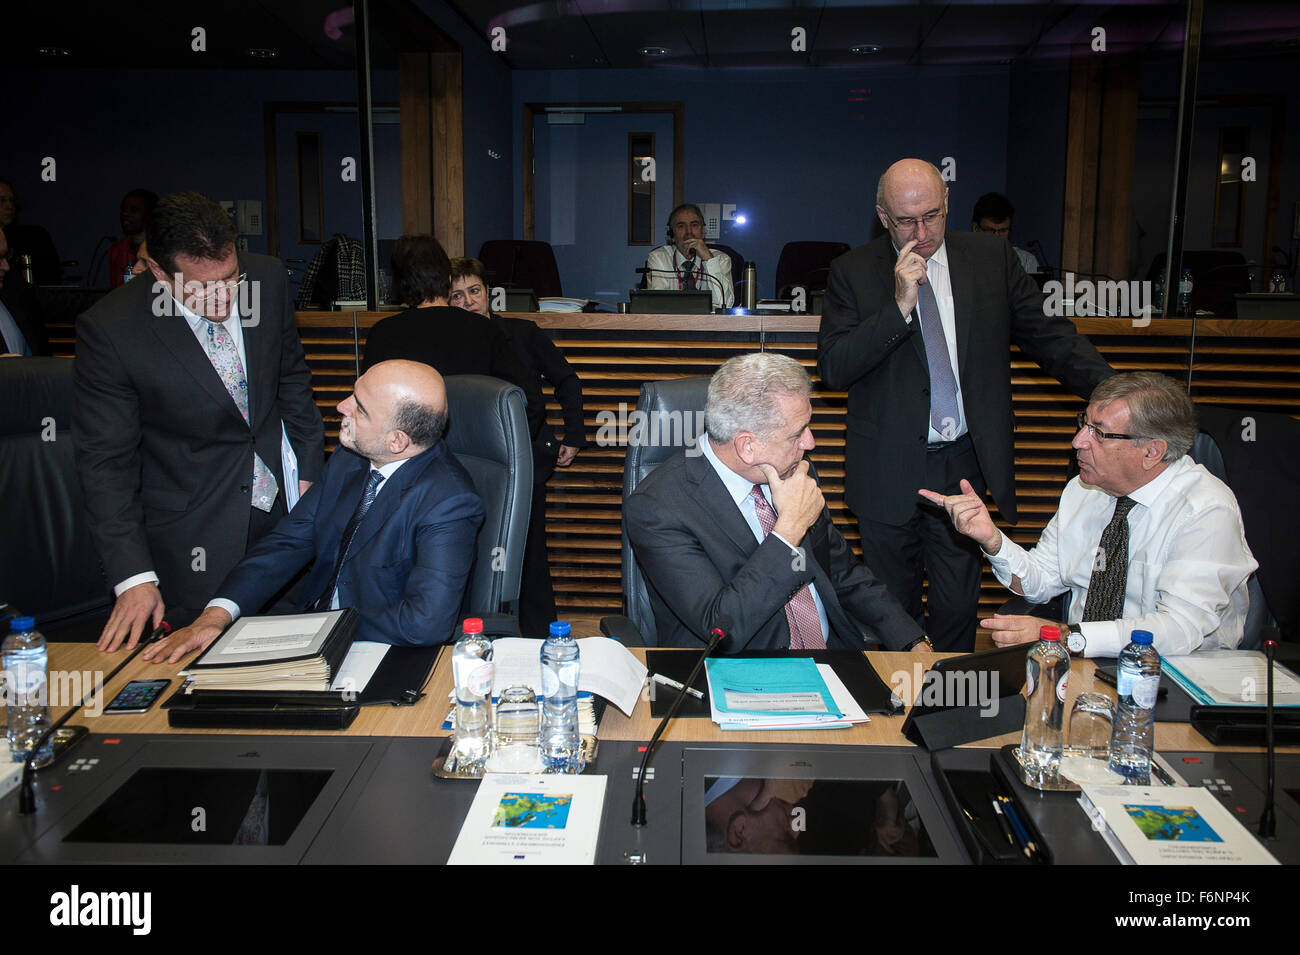 Brussels, Bxl, Belgium. 18th Nov, 2015. (L-R) MaroÅ¡ Å efcovic, Vice-president of the European Union for energy union, Pierre Moscovici, EU commissioner for Economic and financial affairs, taxation and customs union, Dimitris Avramopoulos, EU commissioner for Migration and home affairs, Phil Hogan, EU commissioner for Agriculture and rural development and Karmenu Vella, EU commissioner for Environment, maritime affairs and fisheries prior to the weekly Collage of Commissioners meeting at the European Commission headquarters in Brussels, Belgium on 18.11.2015 The European Commission will Stock Photo